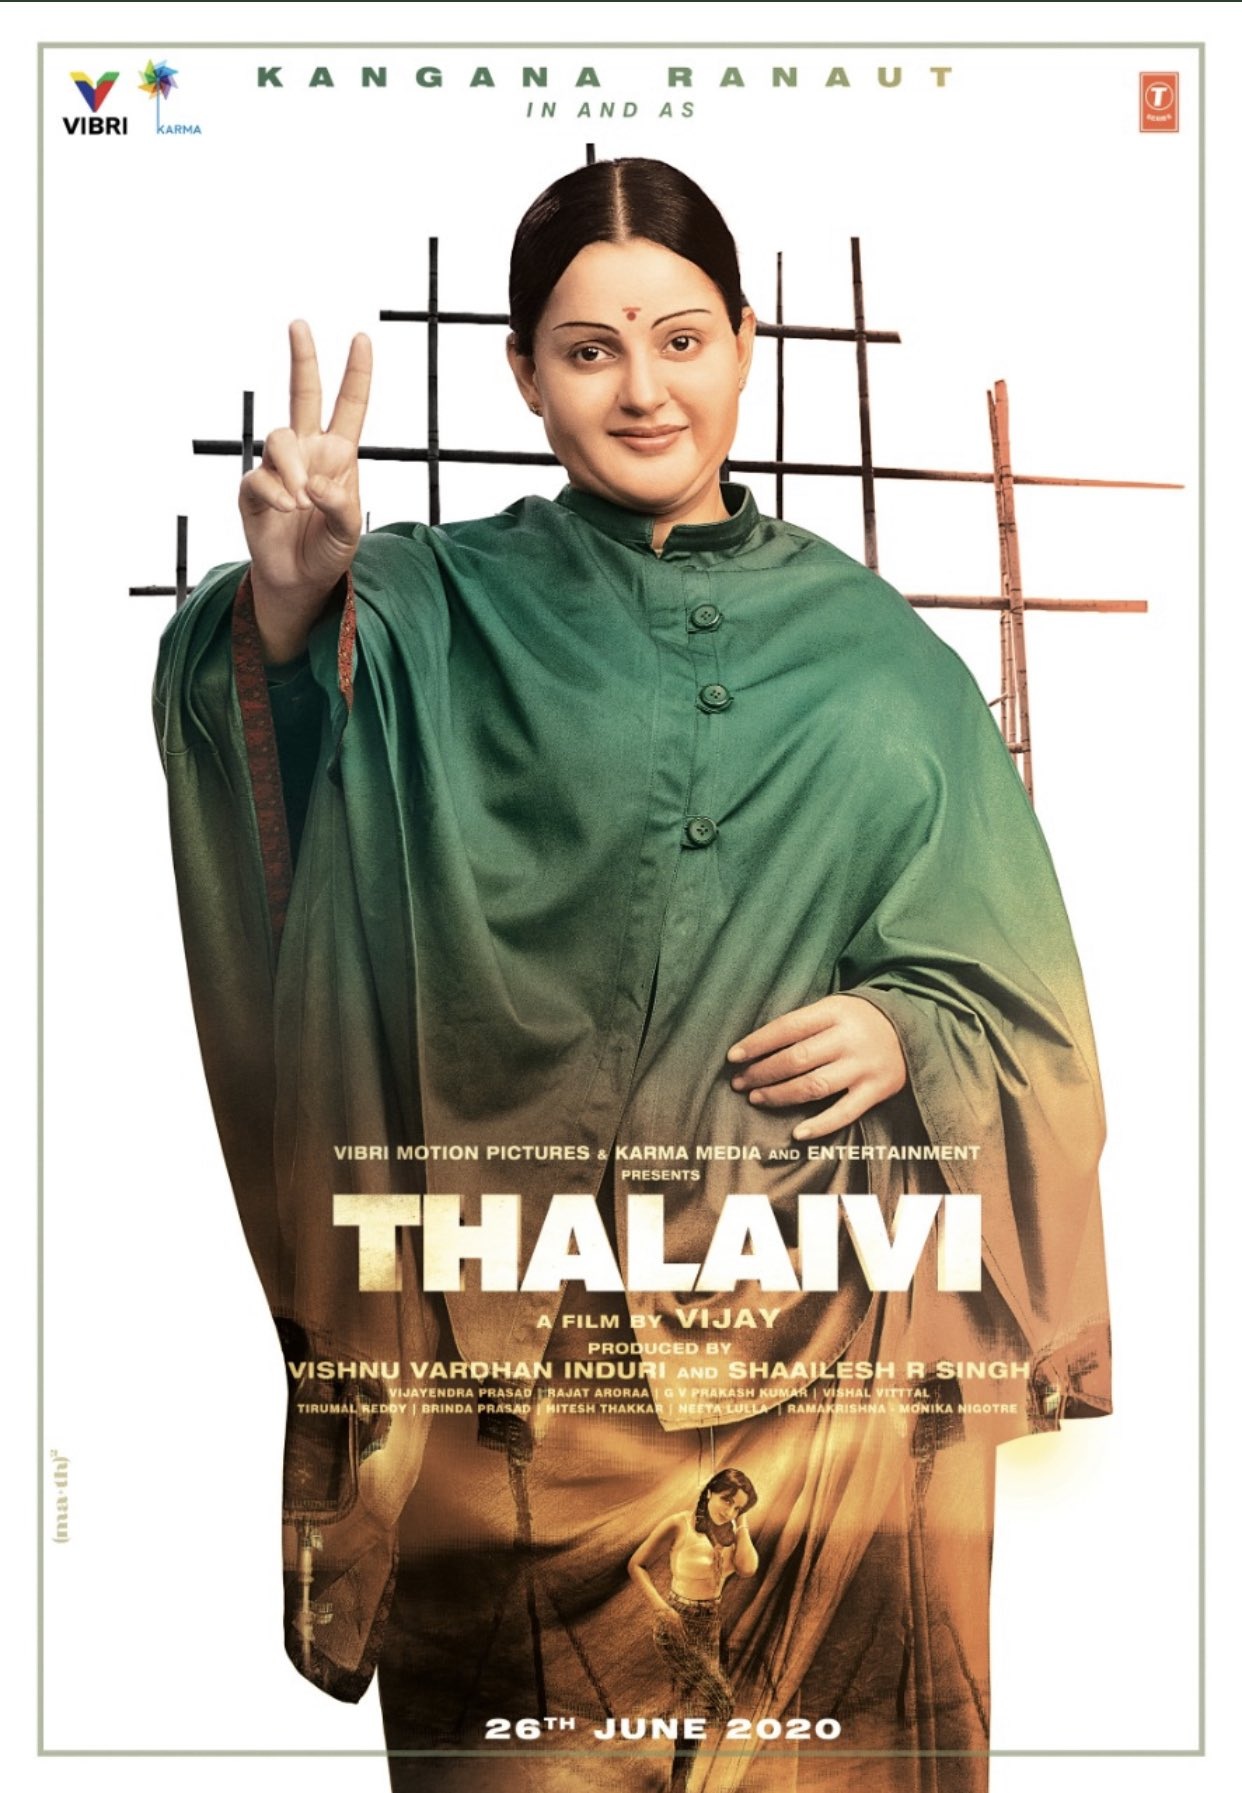 Kangana Ranaut’s first Look as J Jayalalithaa in “Thalaivi” First look, as she seems to be unrecognizable